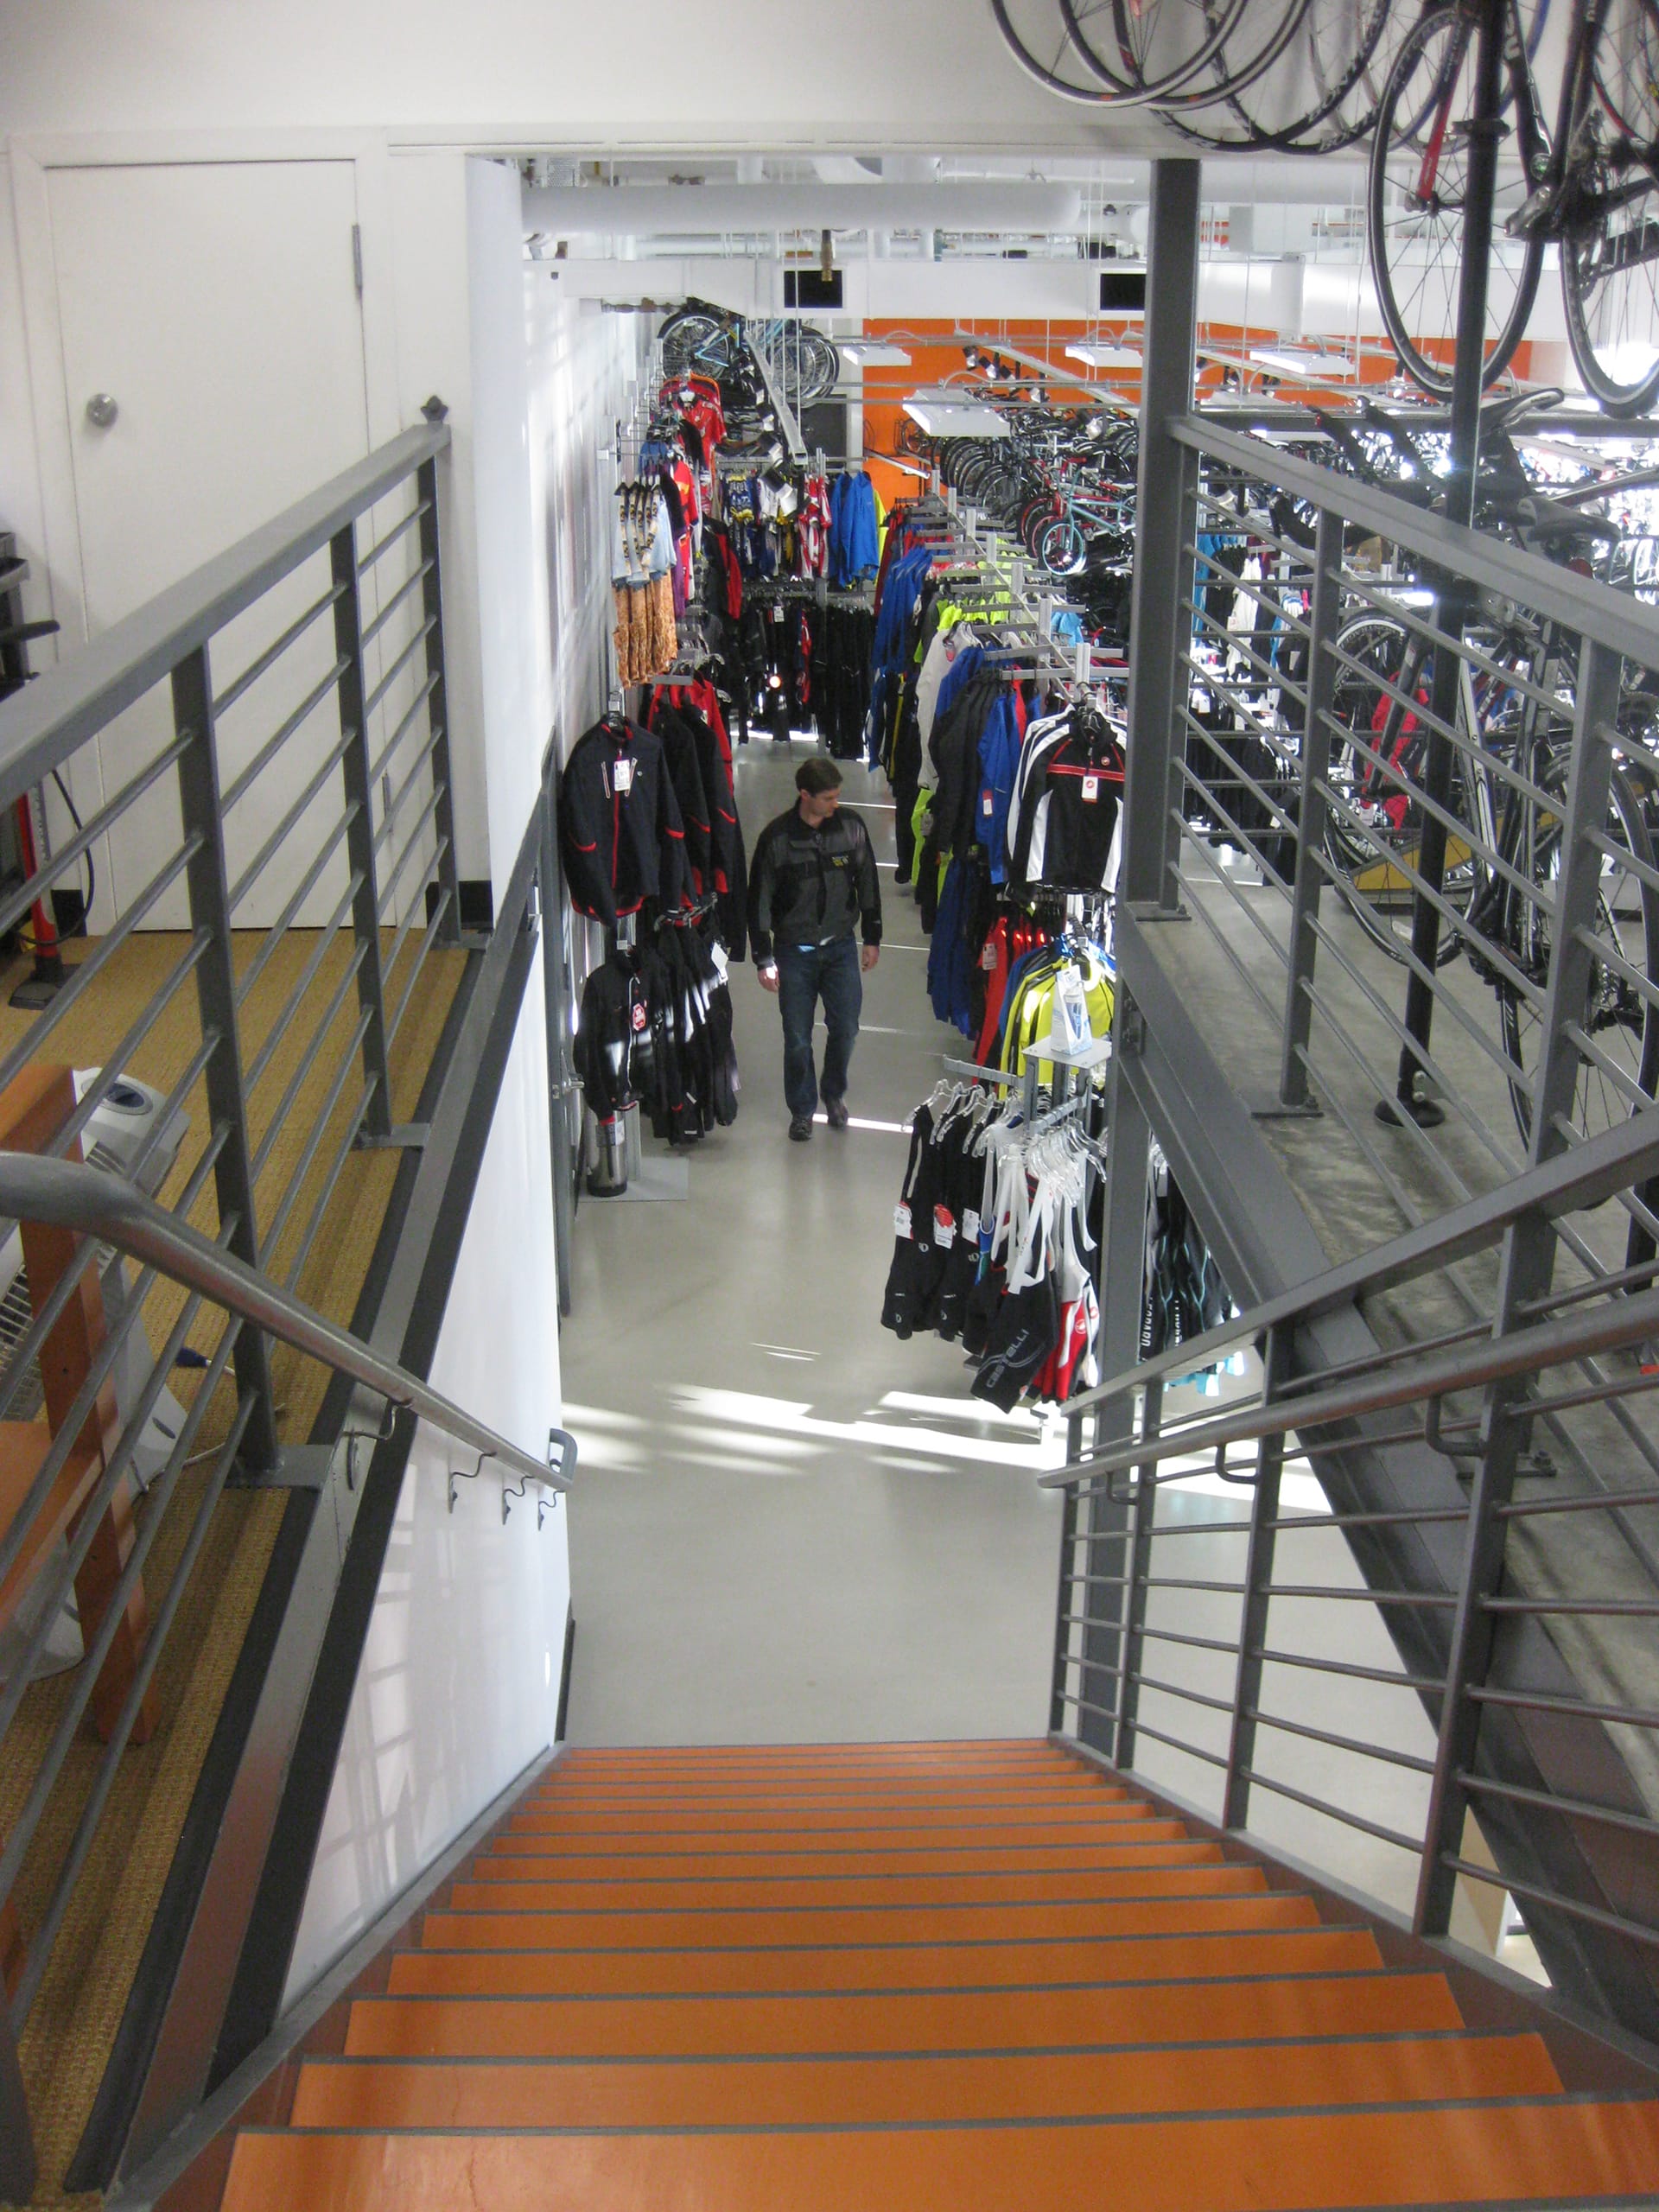 Orange staircase leading from the mezzanine to the main sales floor of a bicycle shop.